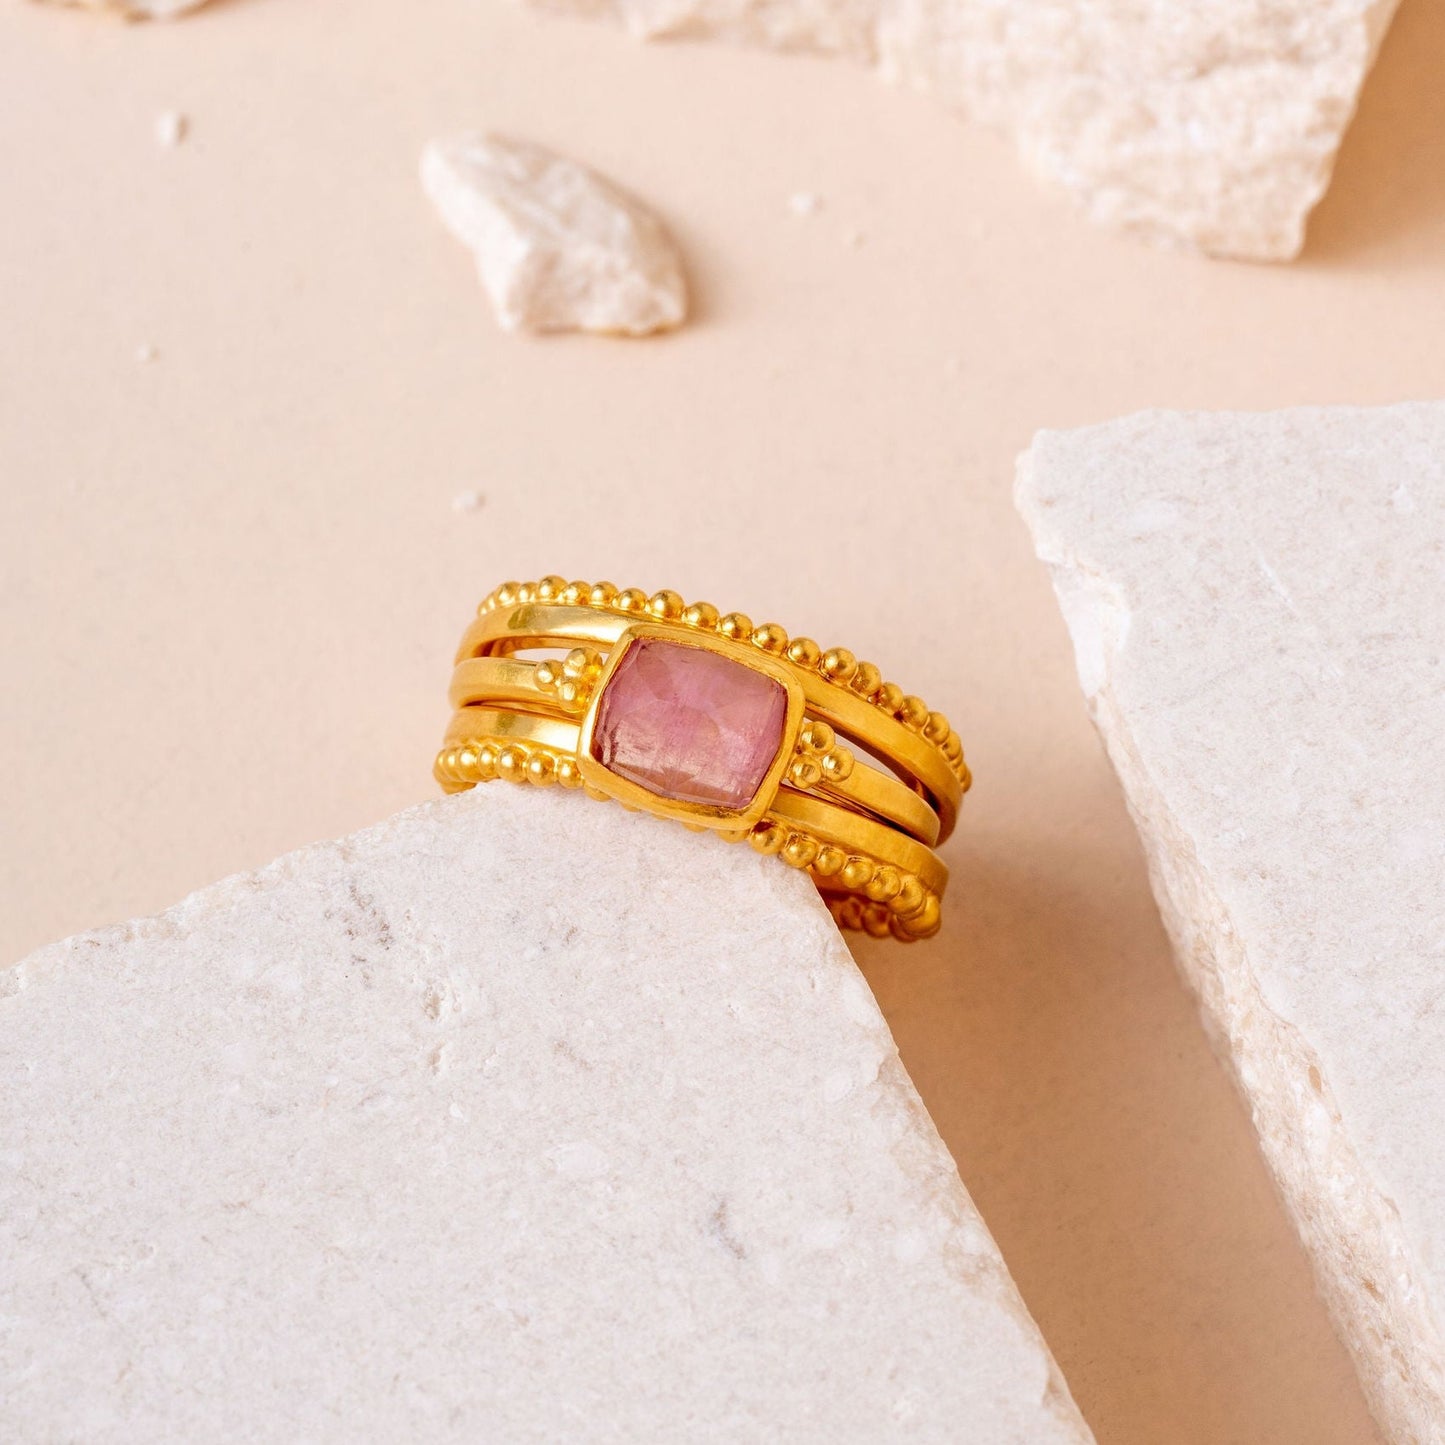 Handcrafted gold ring with delicate granulation and a small light pink square tourmaline gemstone.